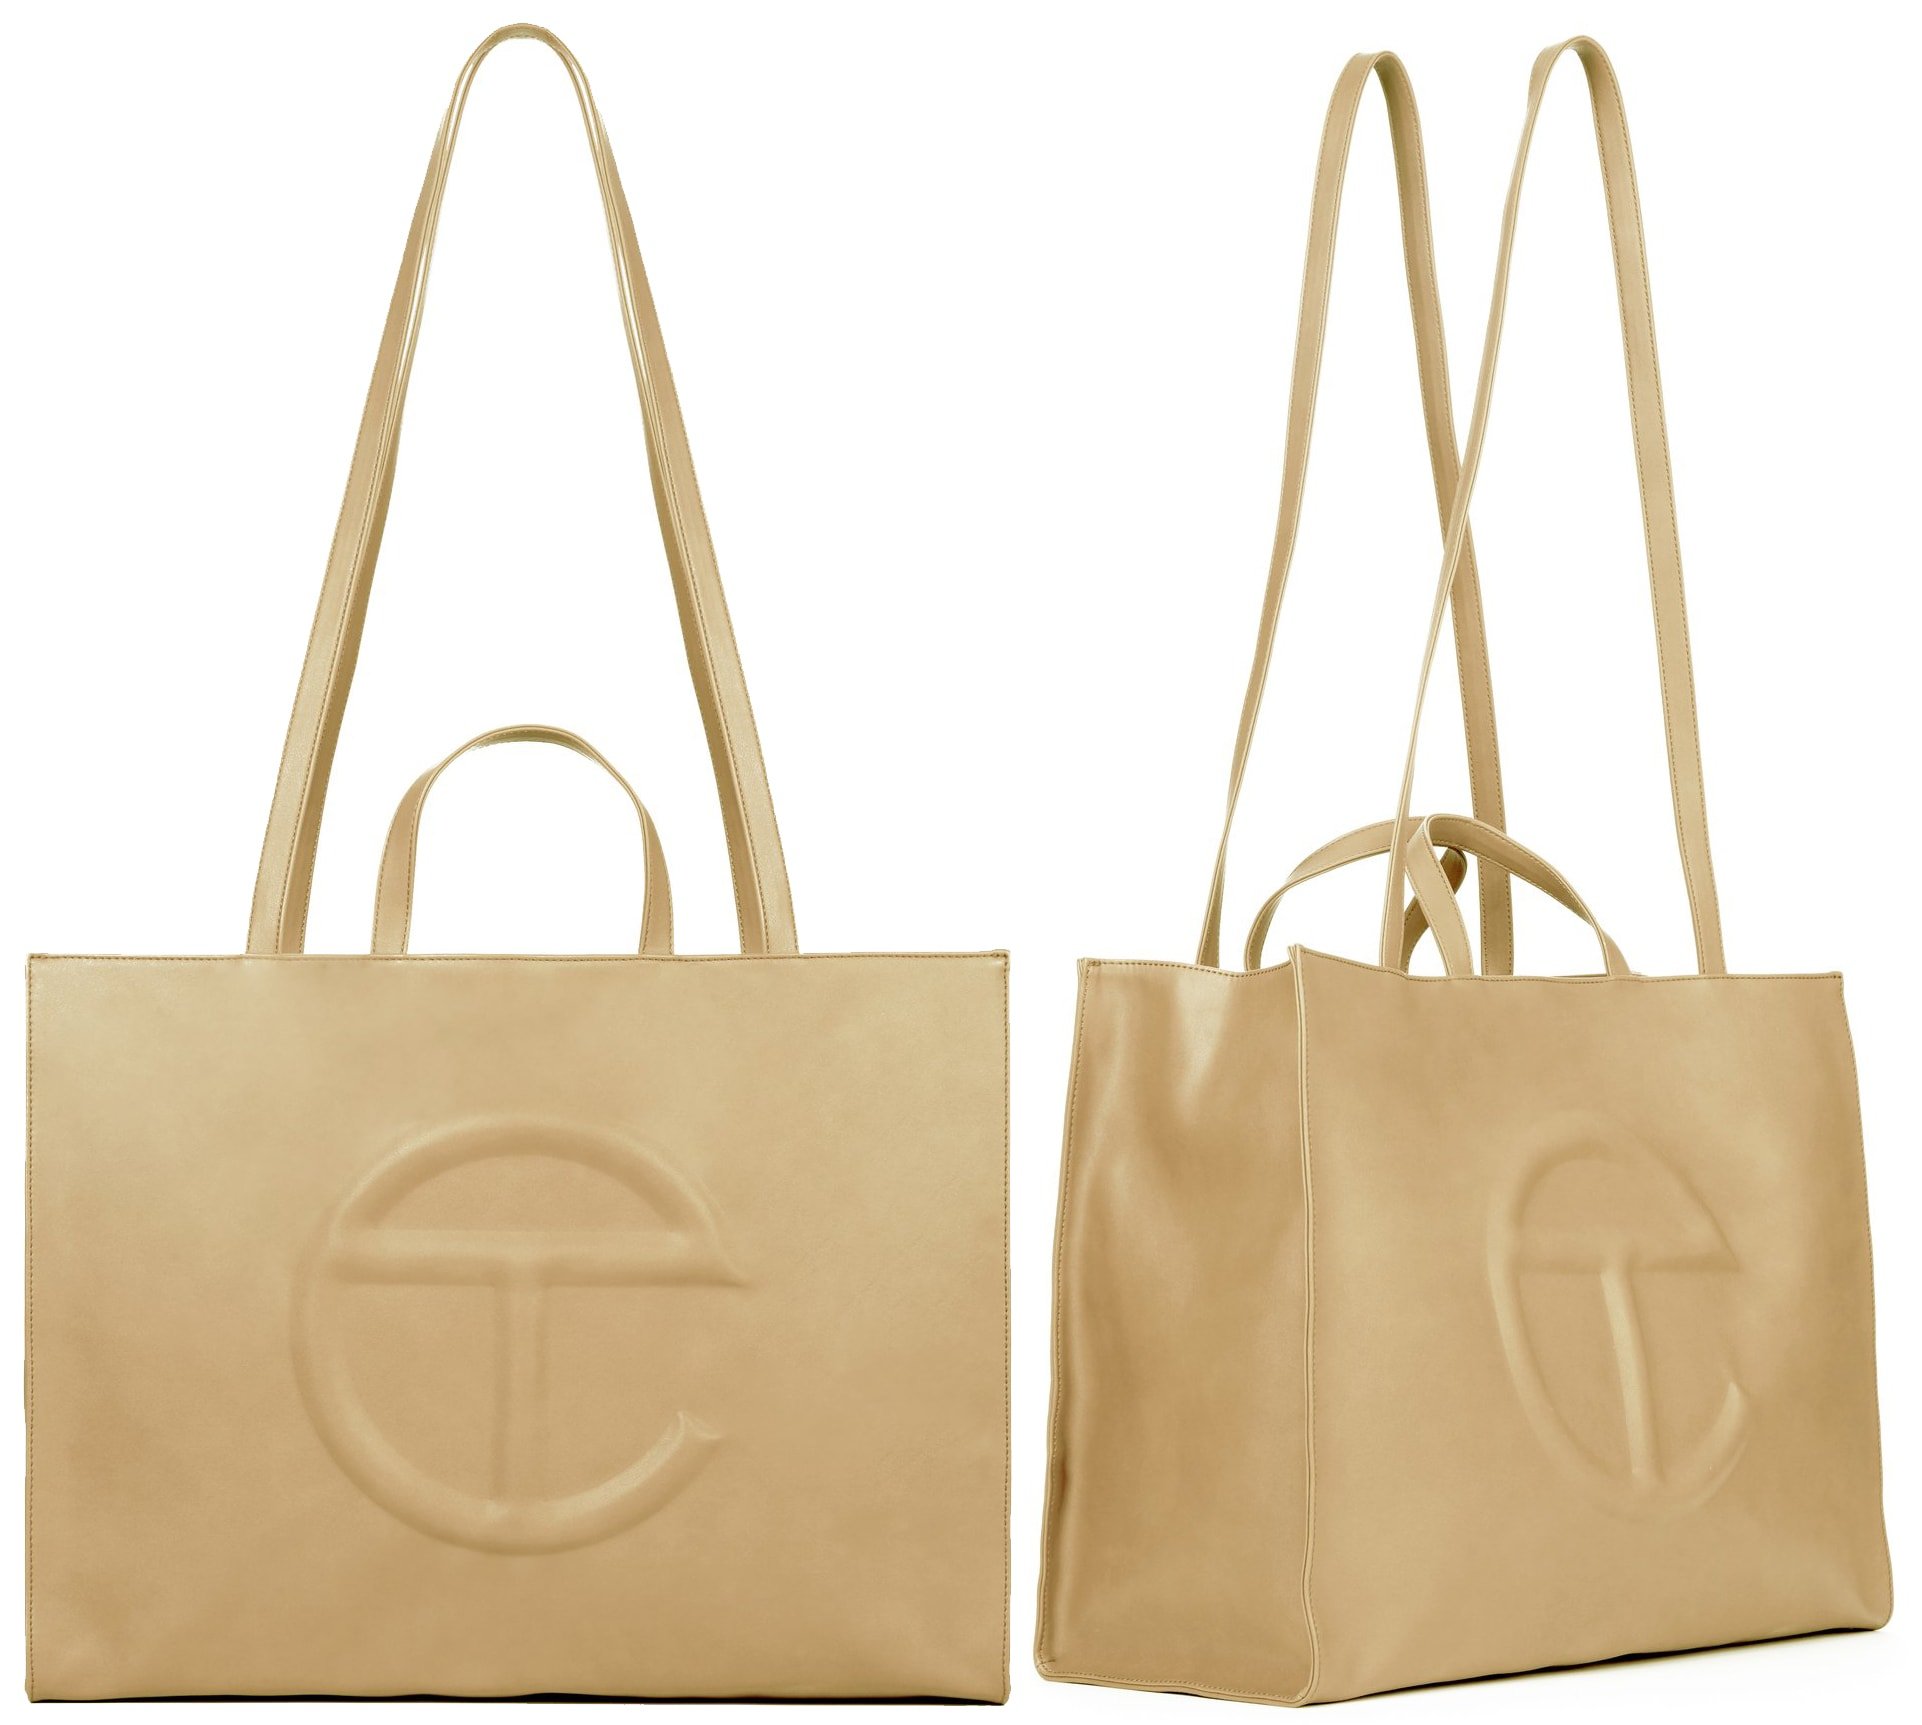 The large cream shopping bag is a classic and it's versatile enough to be paired with just about any other colors